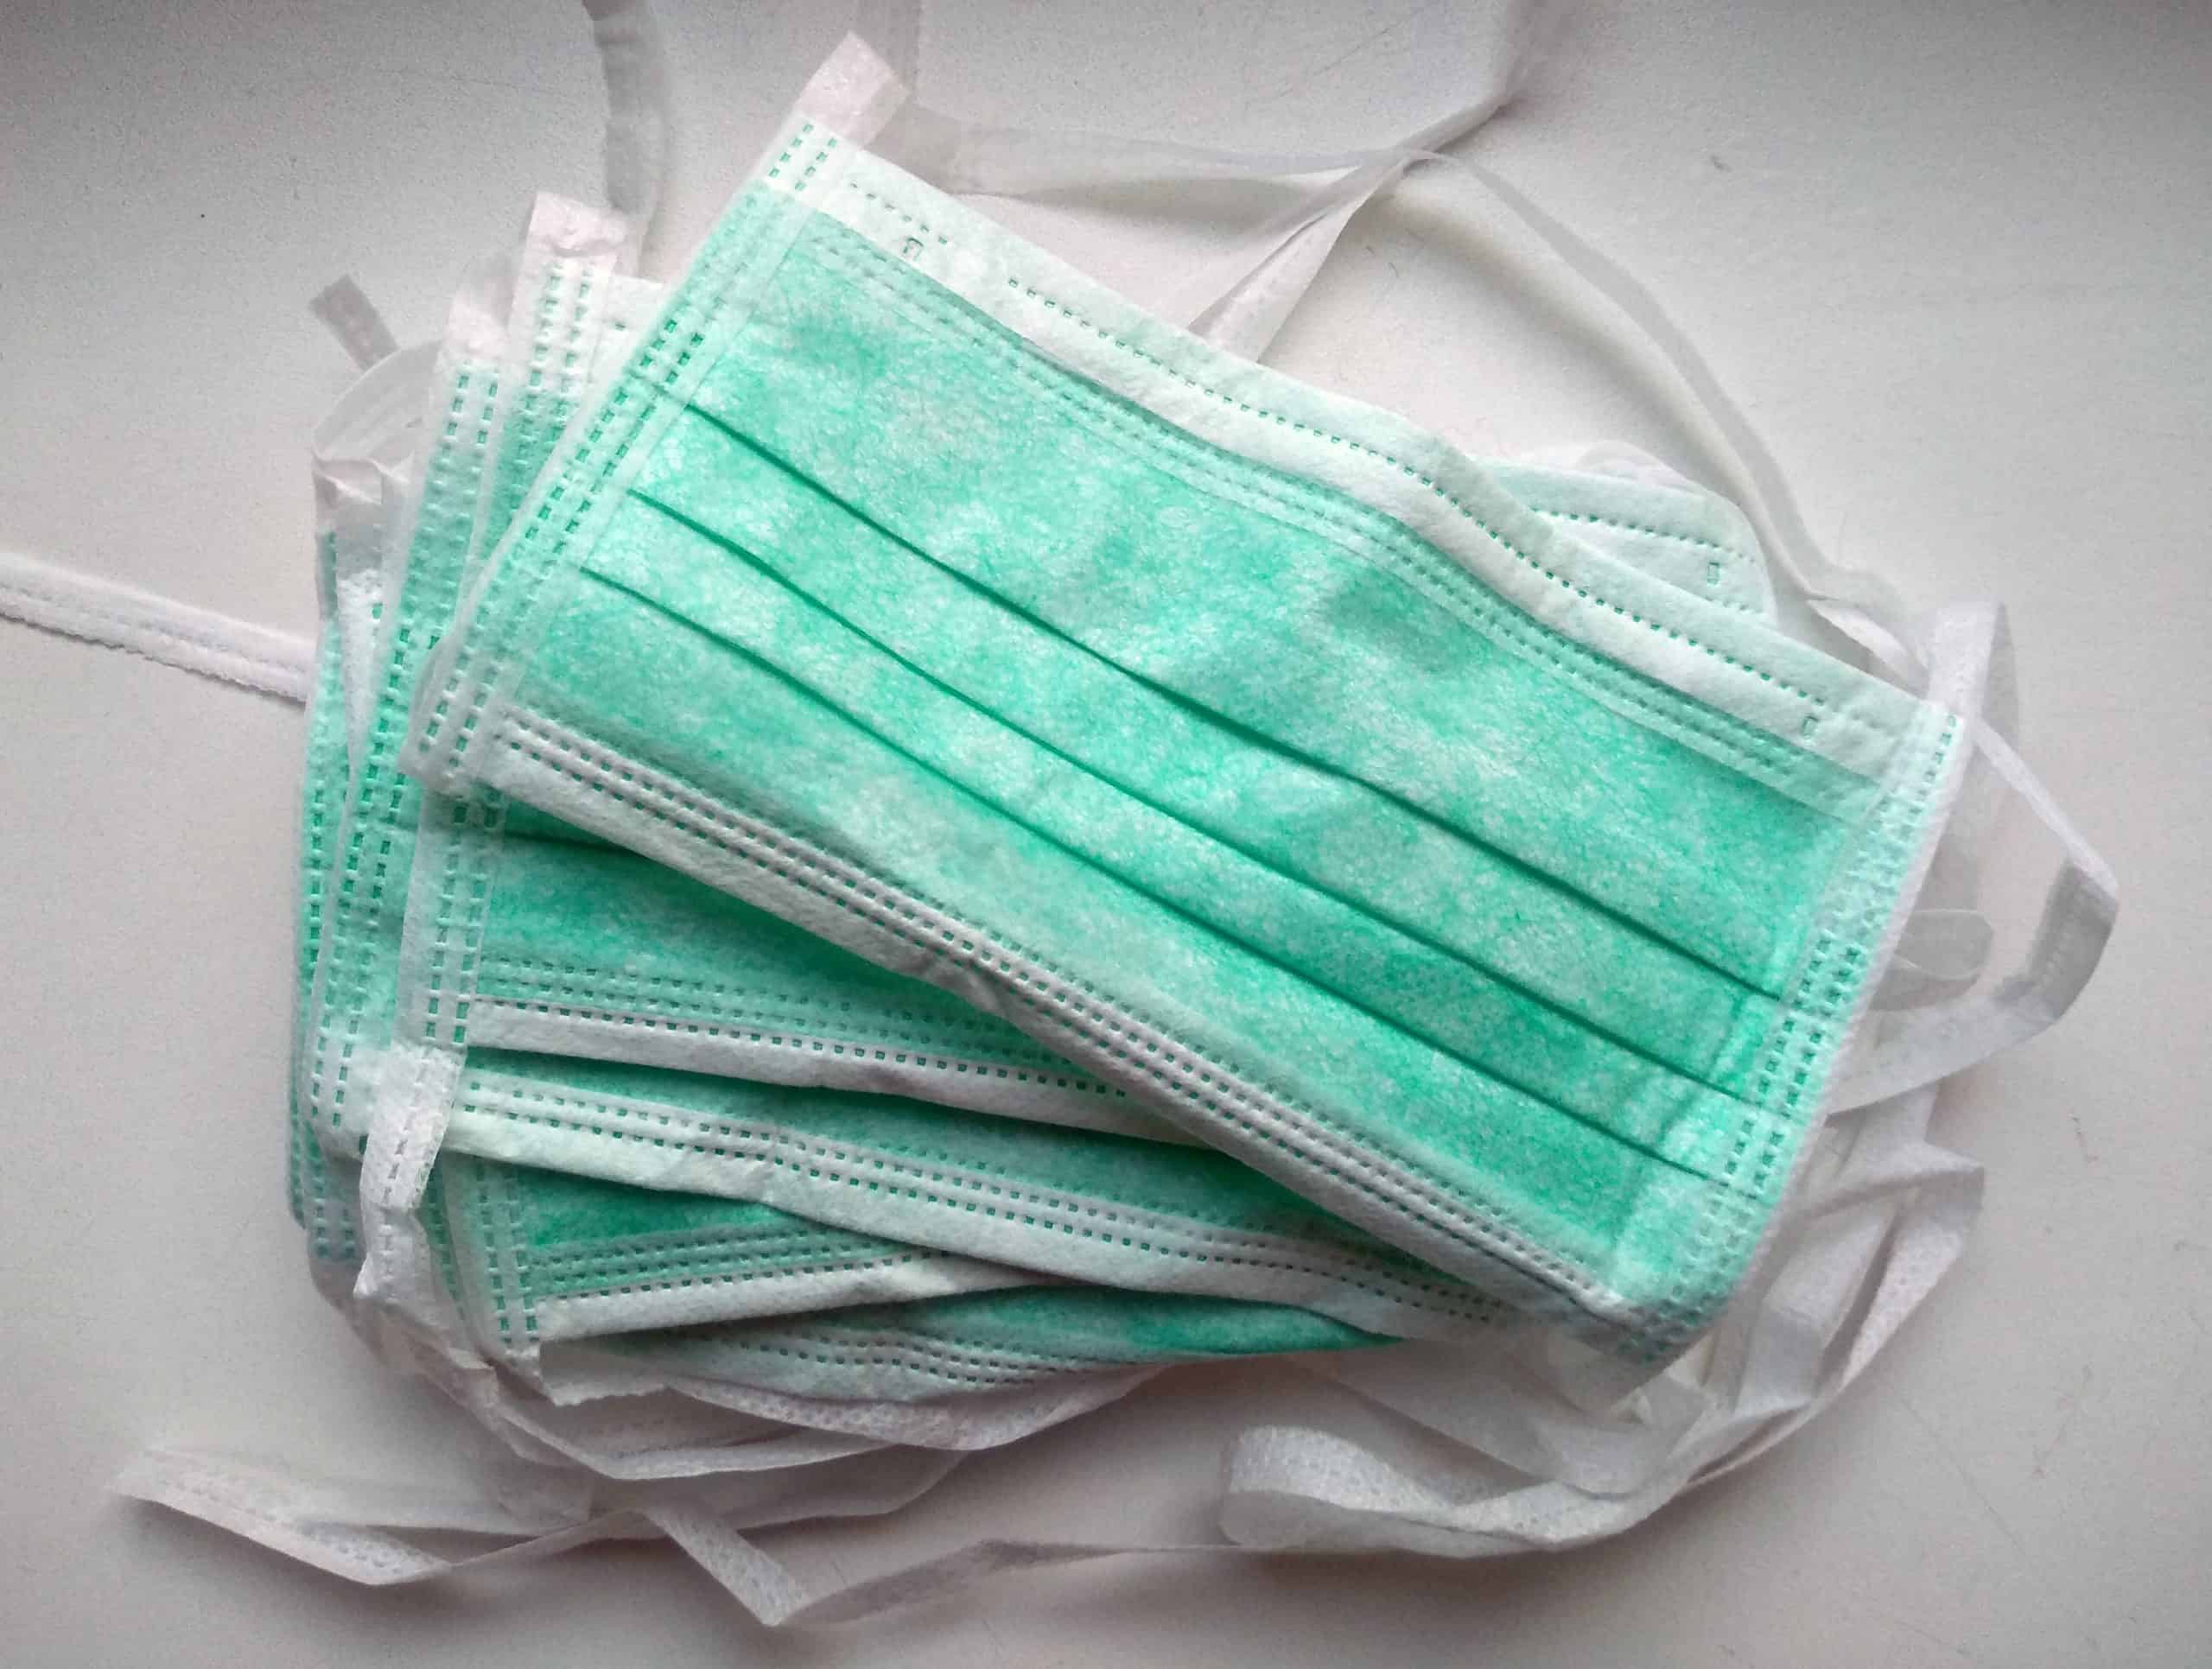 covid_face_masks_used_to_prevent_the_spread_of_coronavirus_and_other_diseases